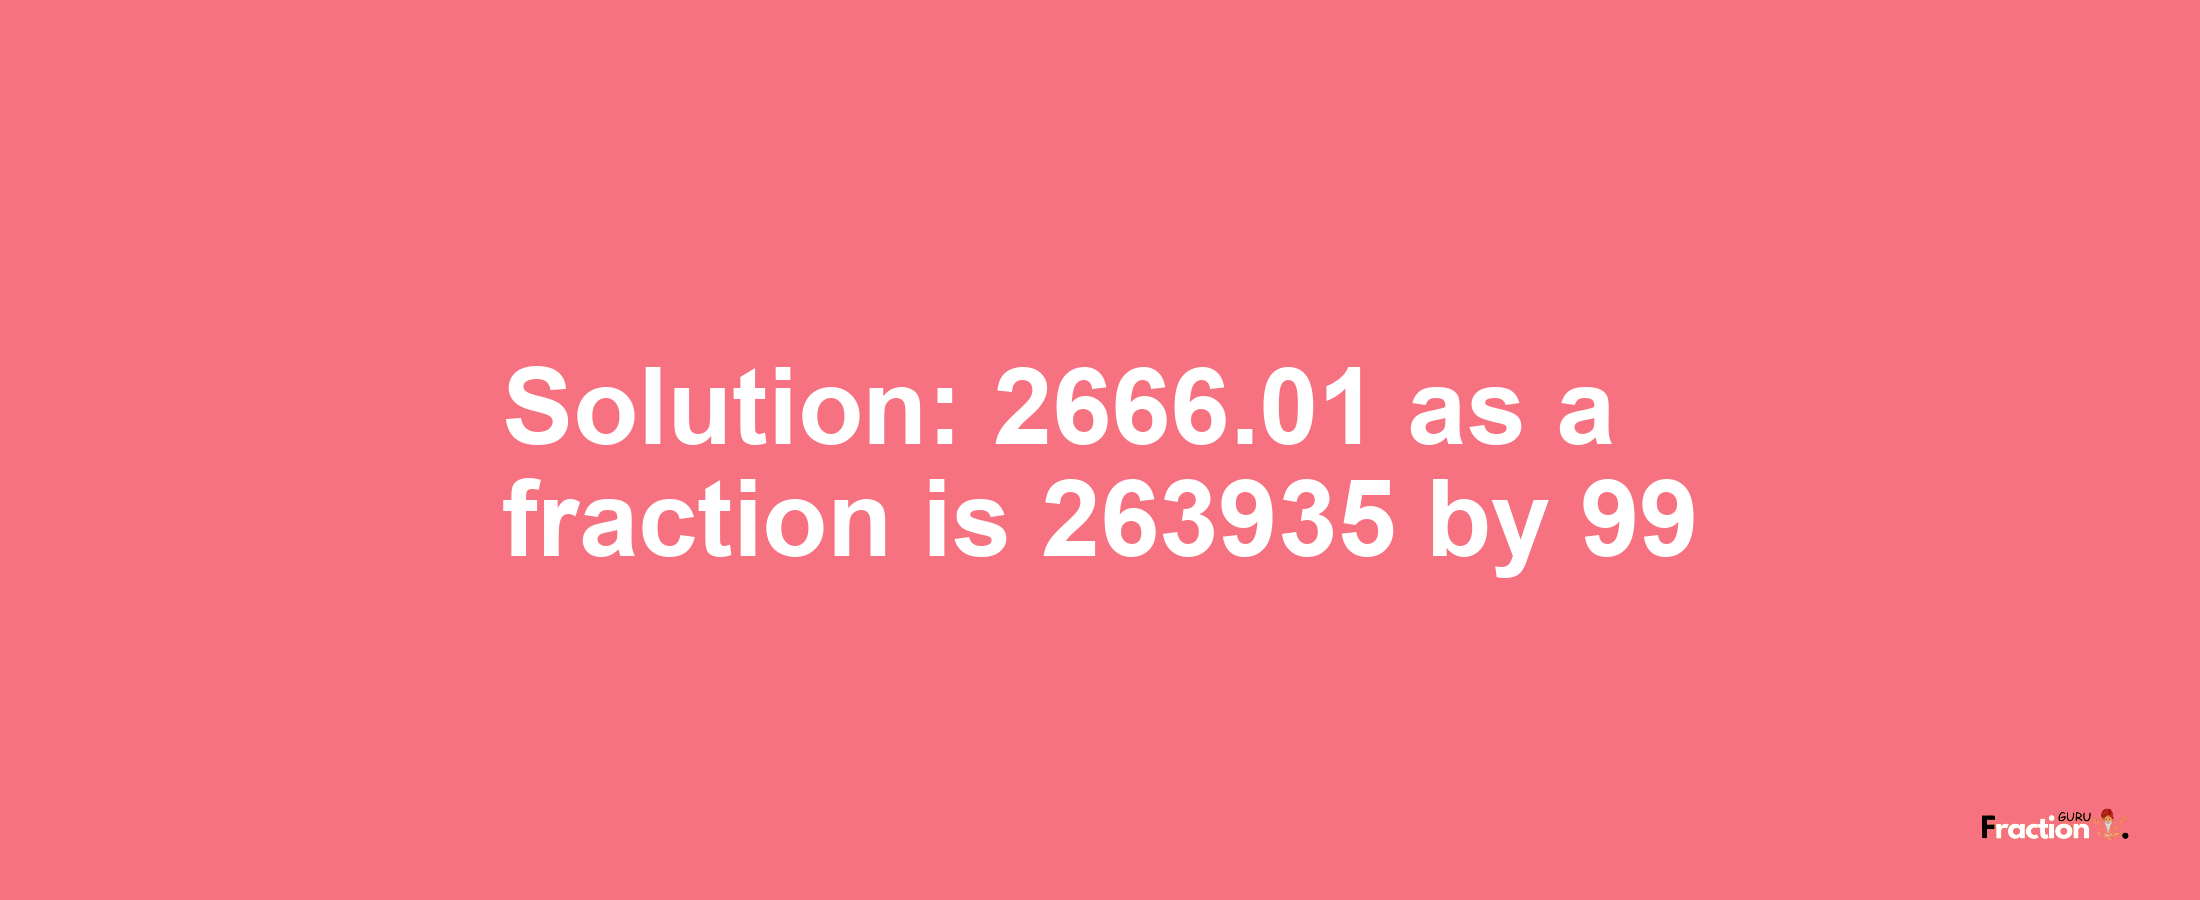 Solution:2666.01 as a fraction is 263935/99